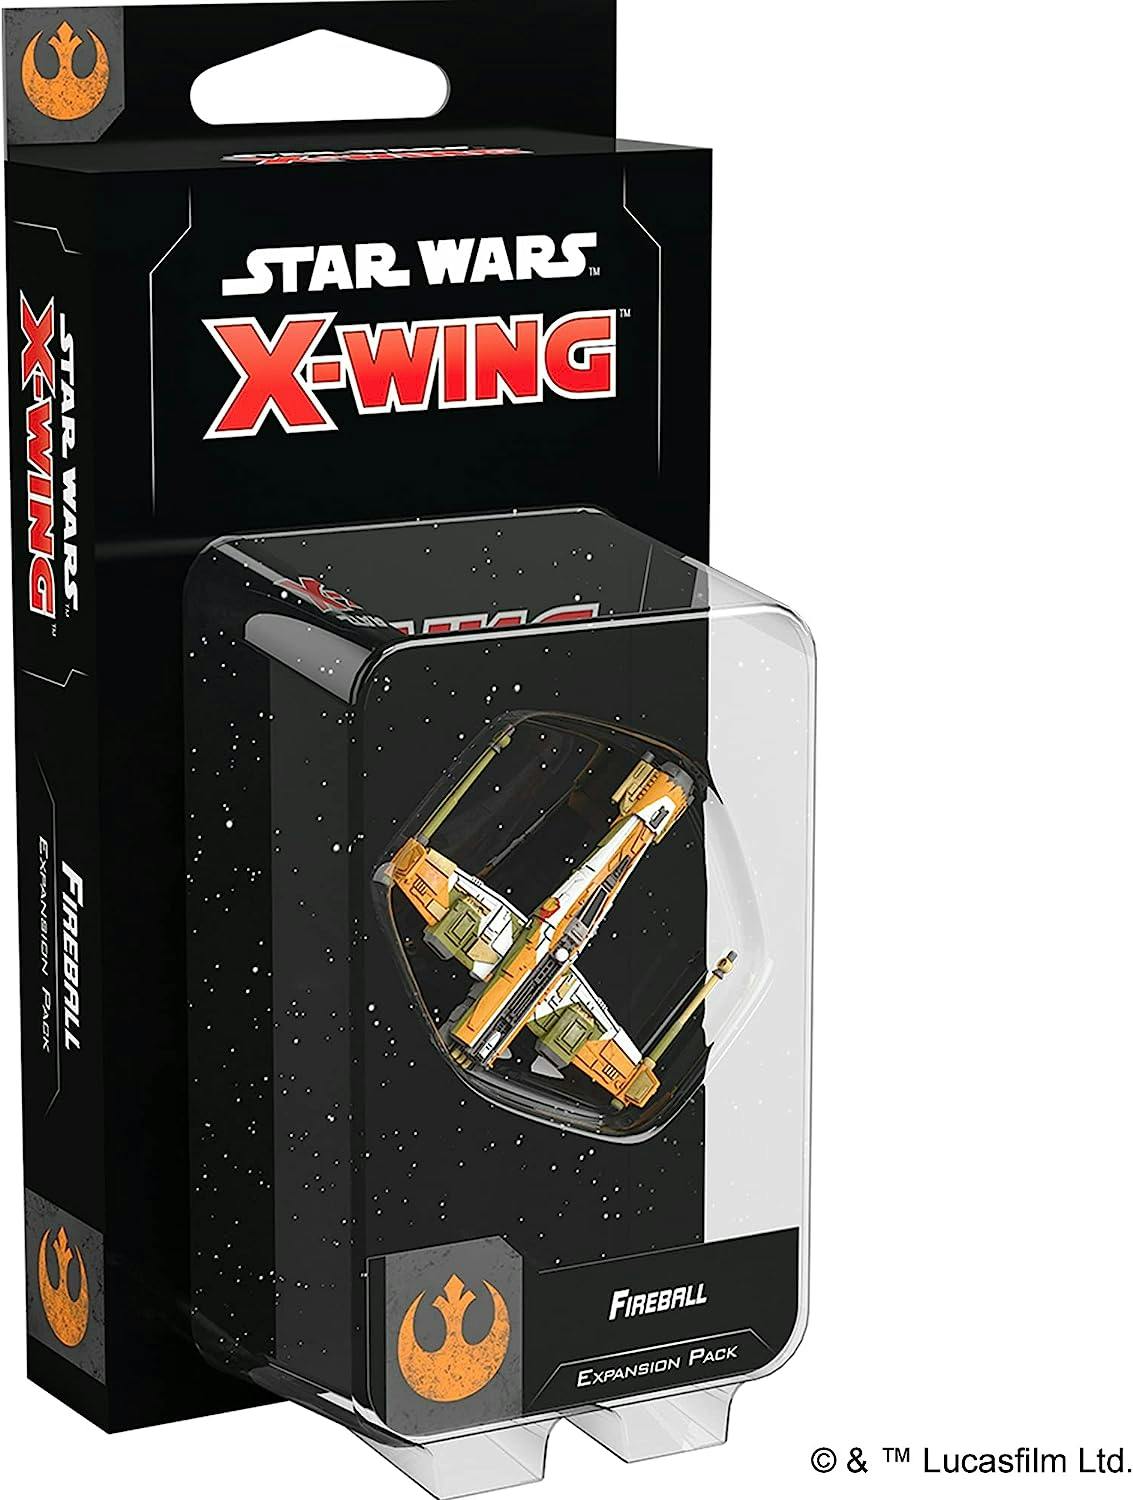 Star Wars X-Wing Miniatures Games: Fireball EXPANSION PACK